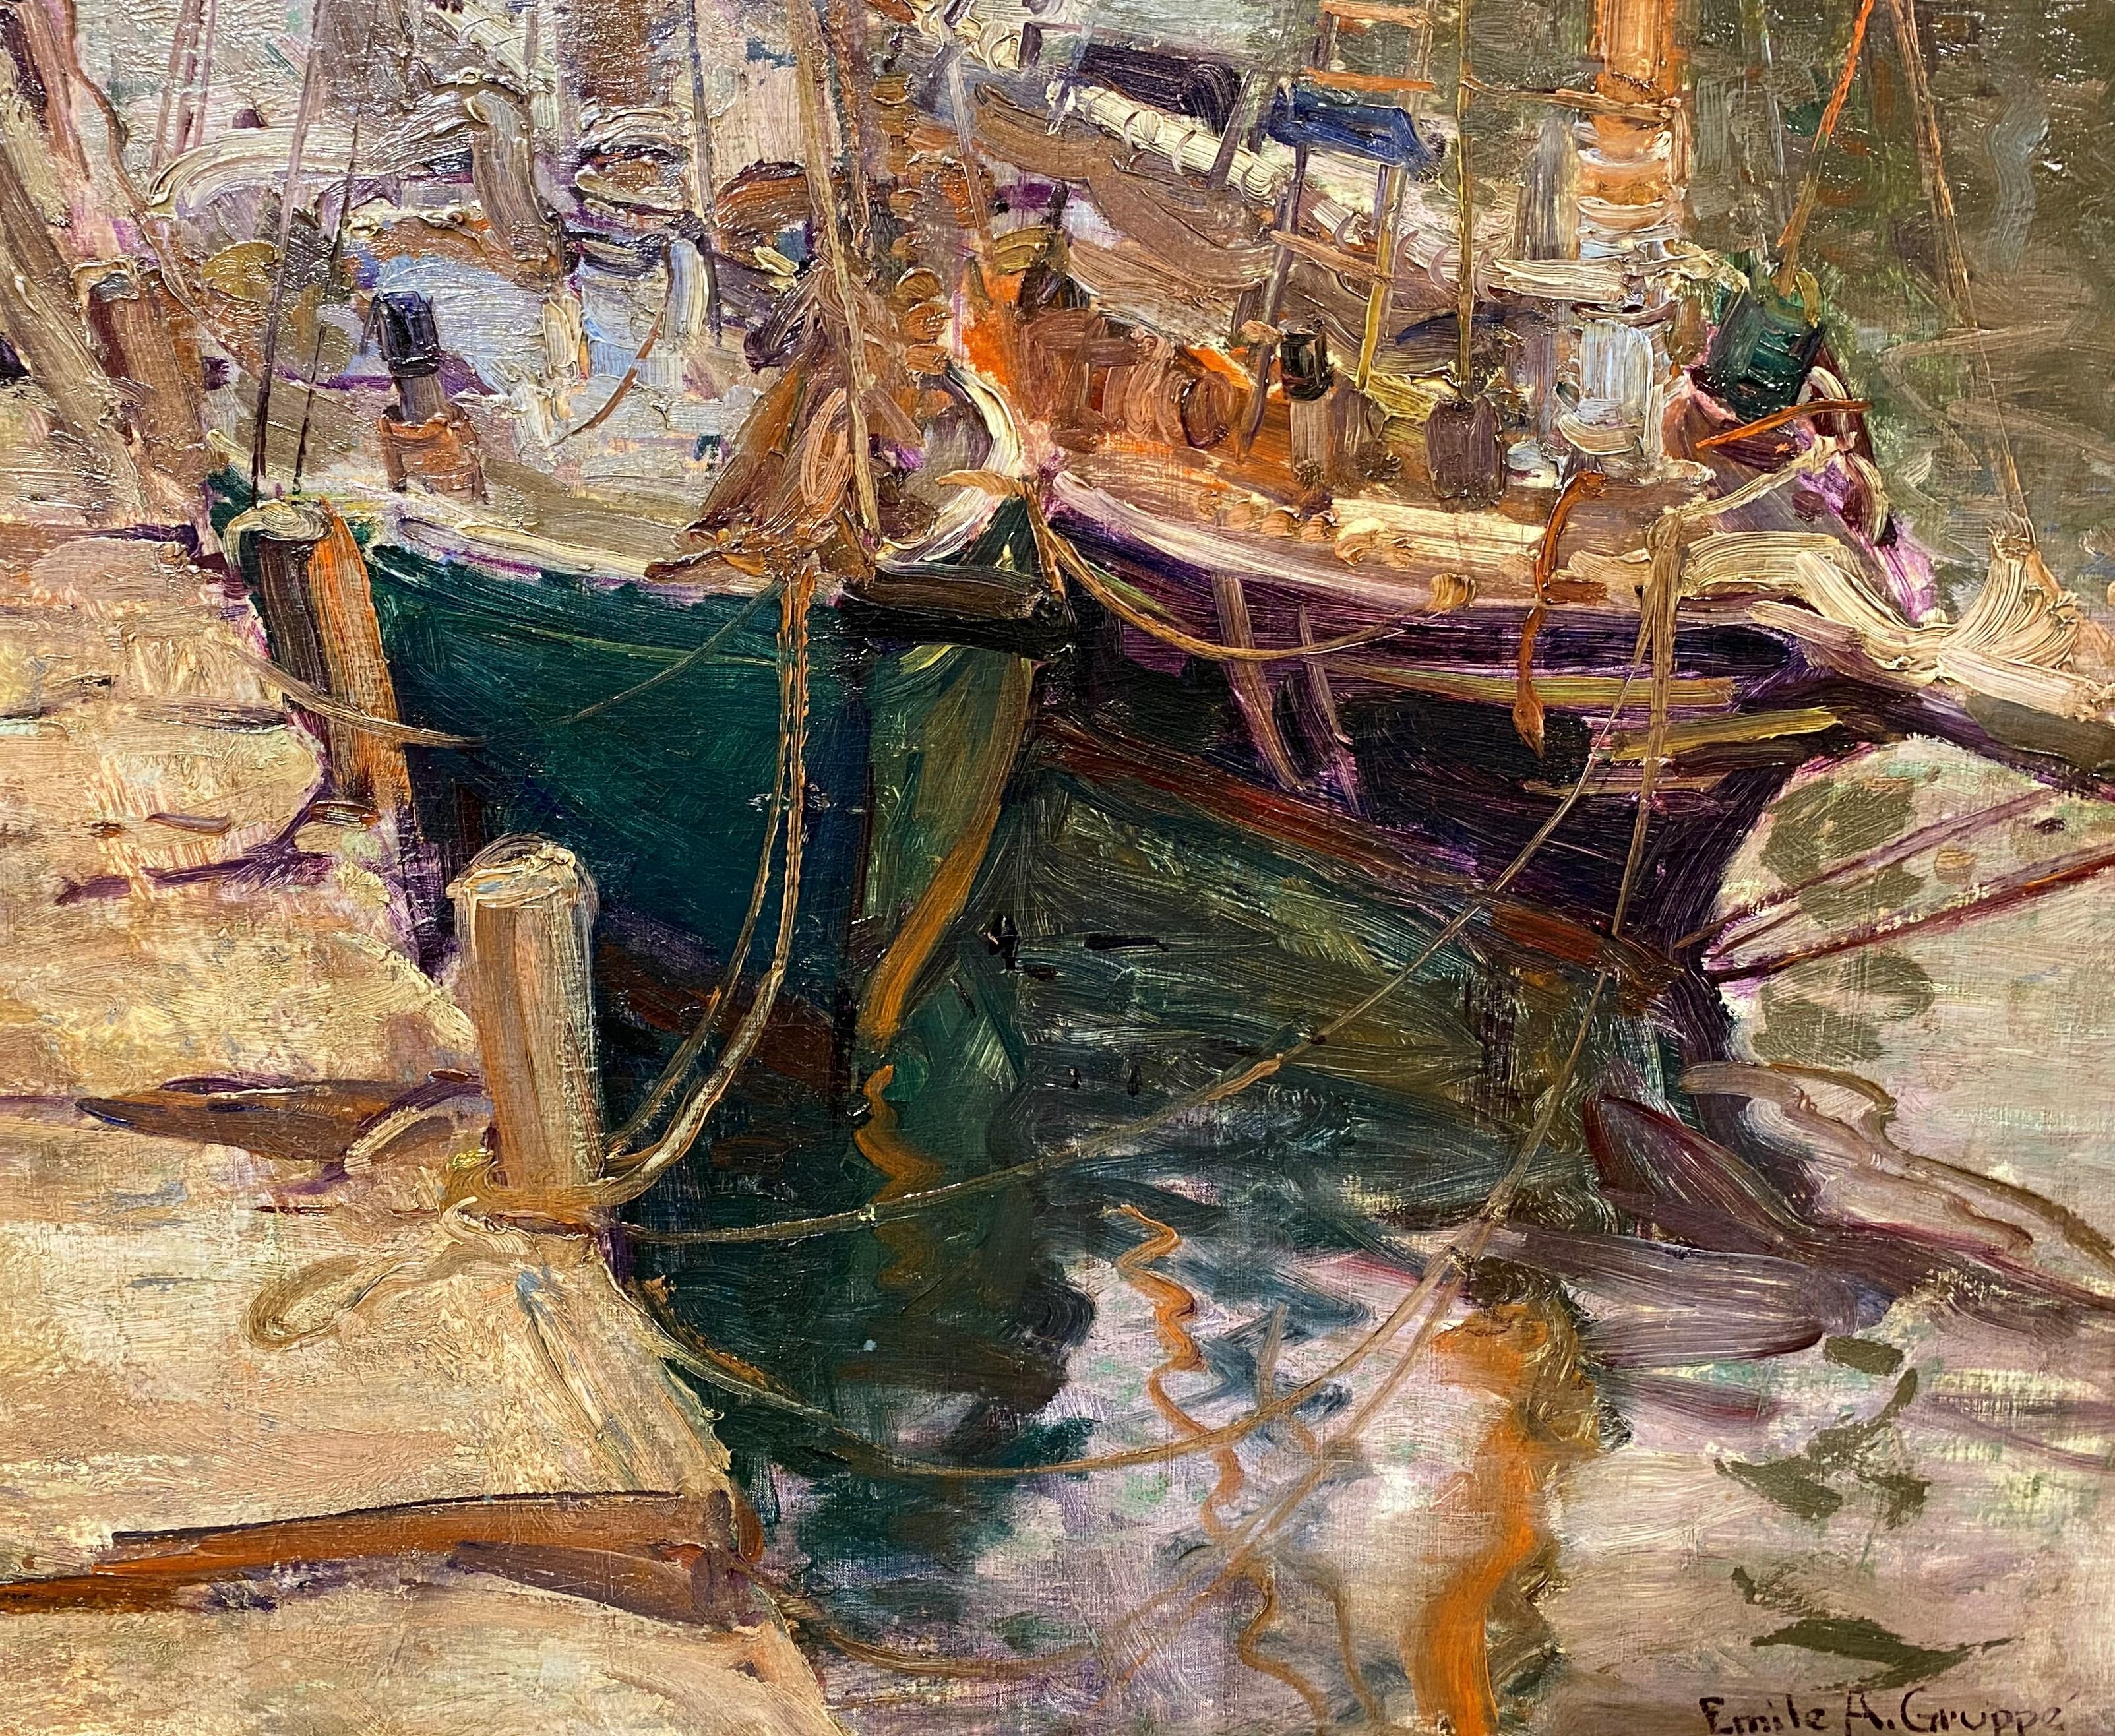 A fine impressionist marine harbor scene with boats in Gloucester by American artist Emile Albert Gruppe (1896-1978). Gruppe was born in Rochester, NY, and went on to become a renowned New England landscape and marine painter, best known for his